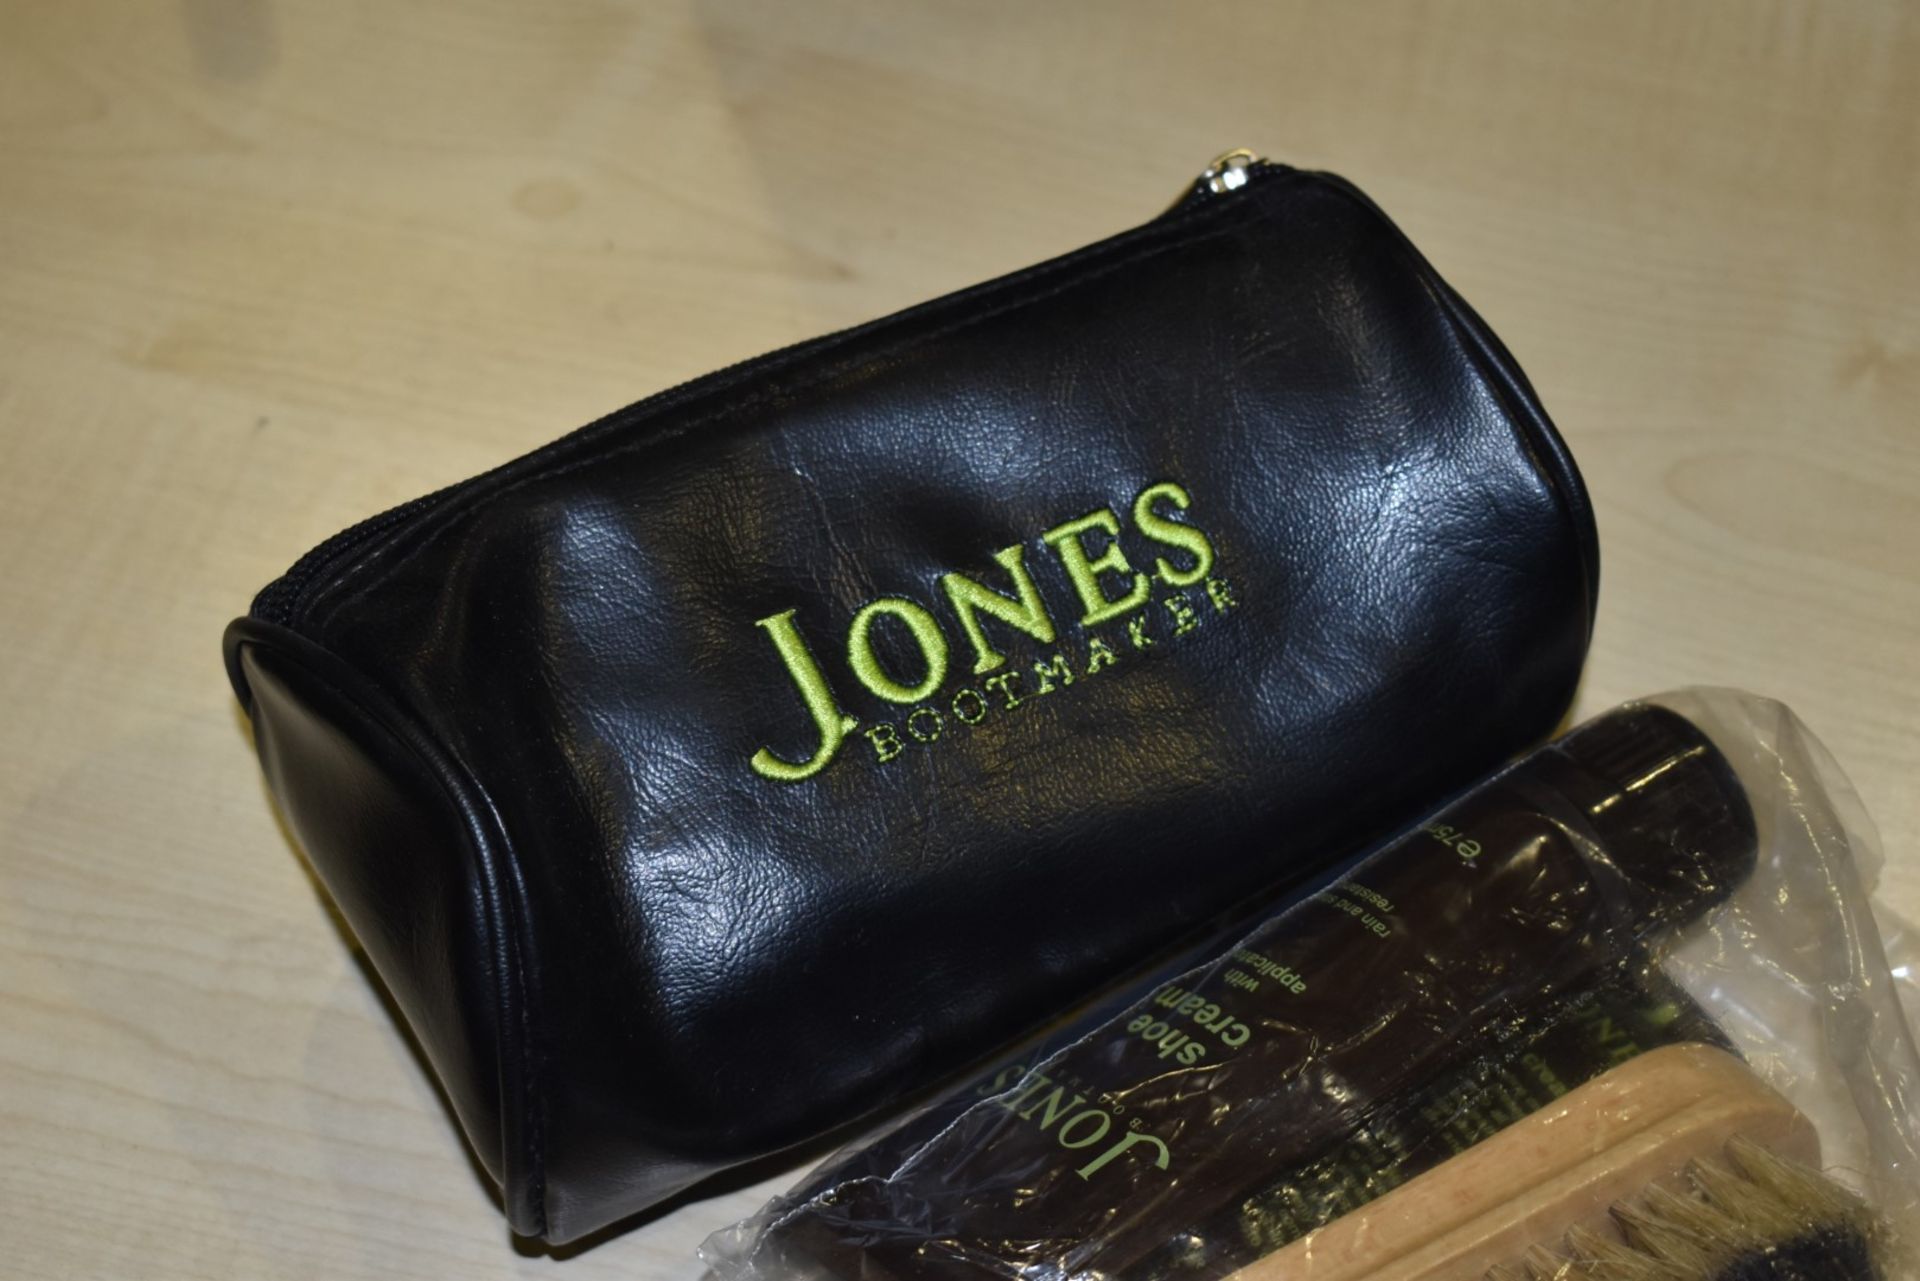 1 x Brand New Jones Shoe Cleaning Kit - Includes Creams, Brushes, Clothe and Carry Case - Ref: - Image 4 of 4